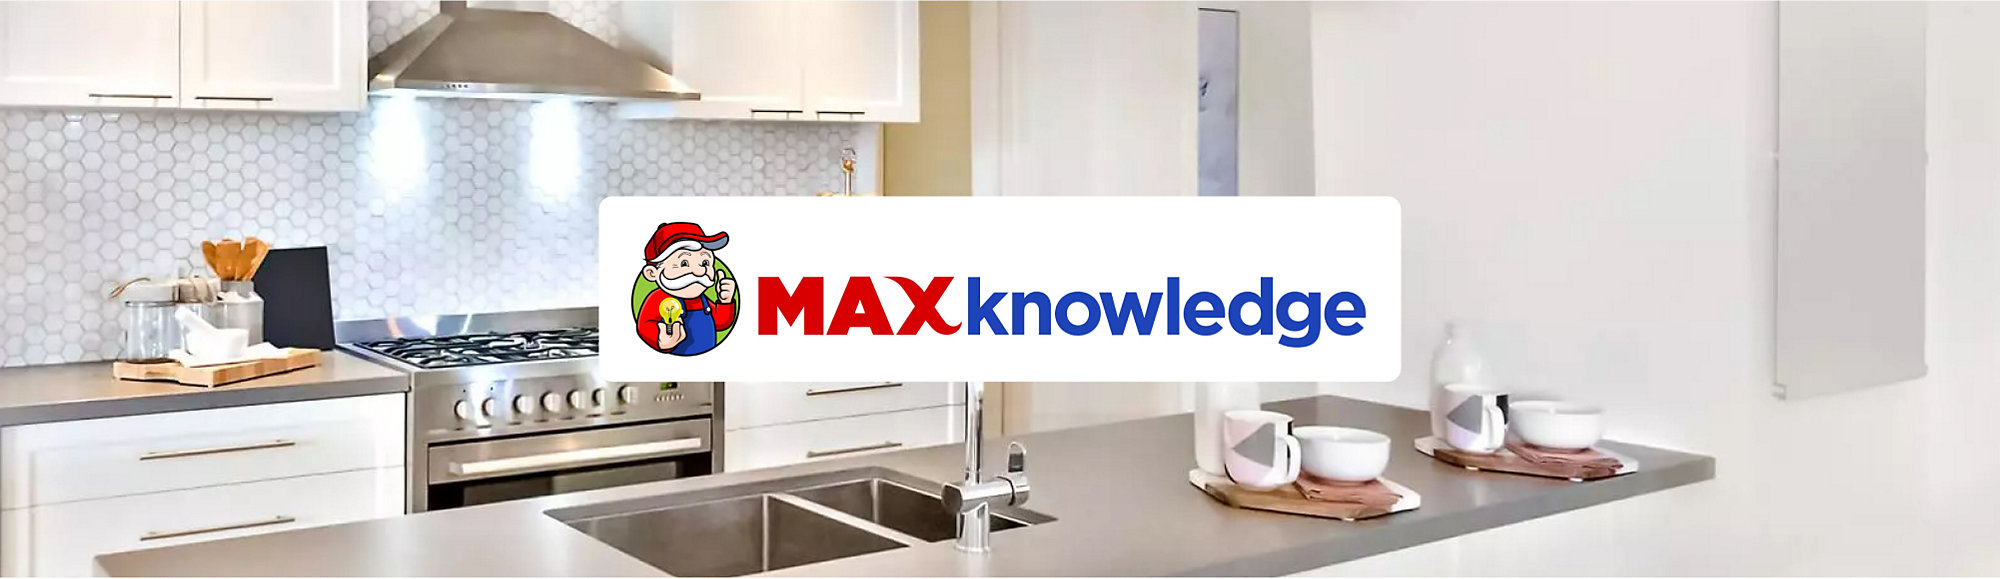 MaxKnowledge hero with kitchen in the background